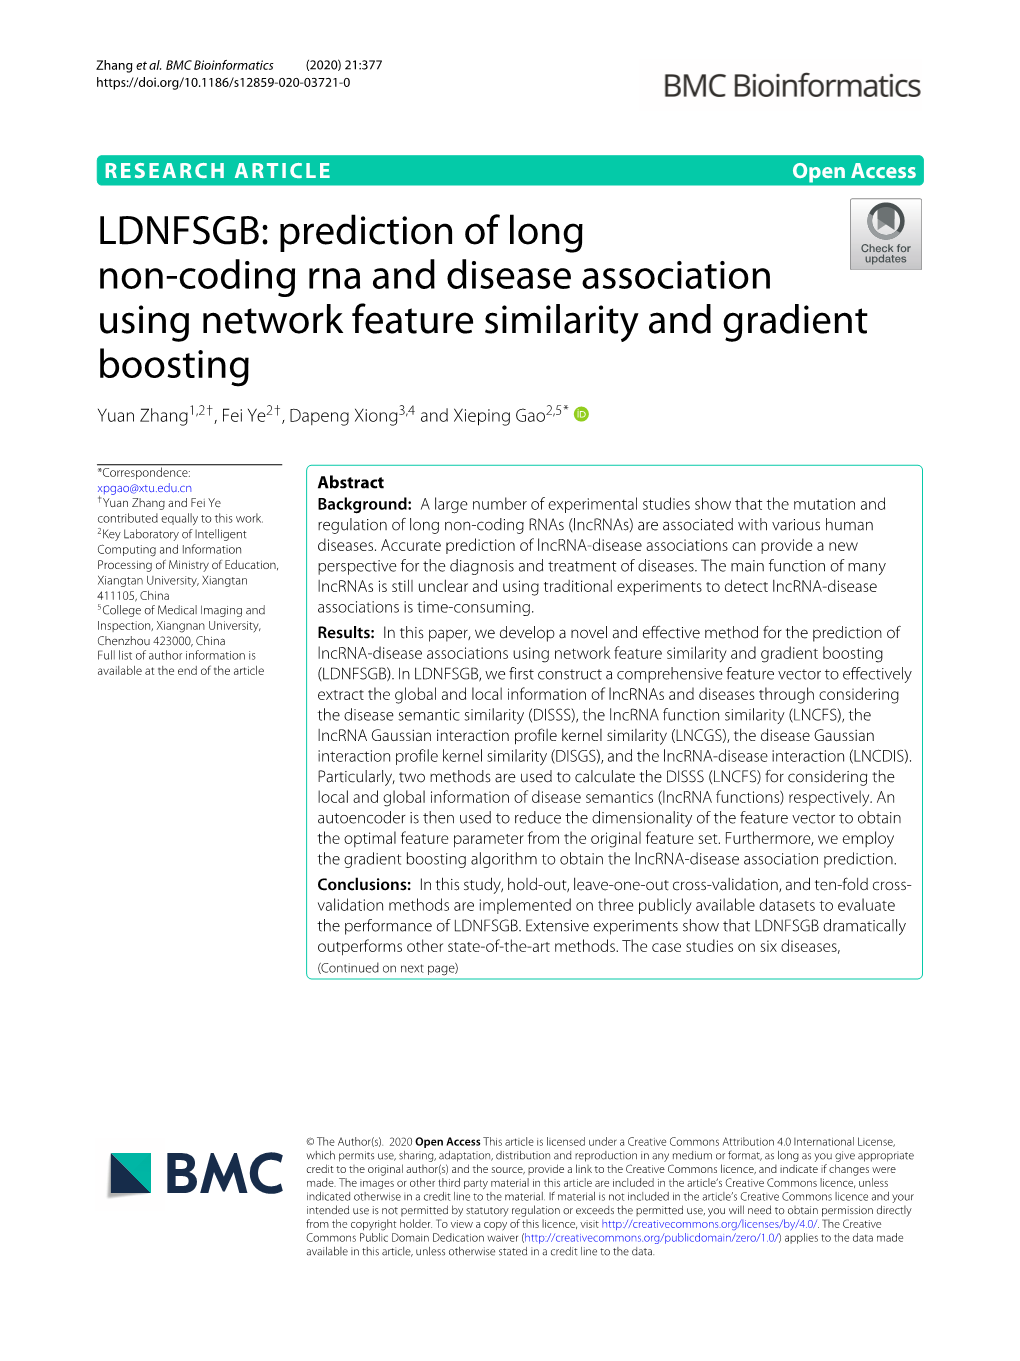 Prediction of Long Non-Coding Rna and Disease Association Using Network Feature Similarity and Gradient Boosting